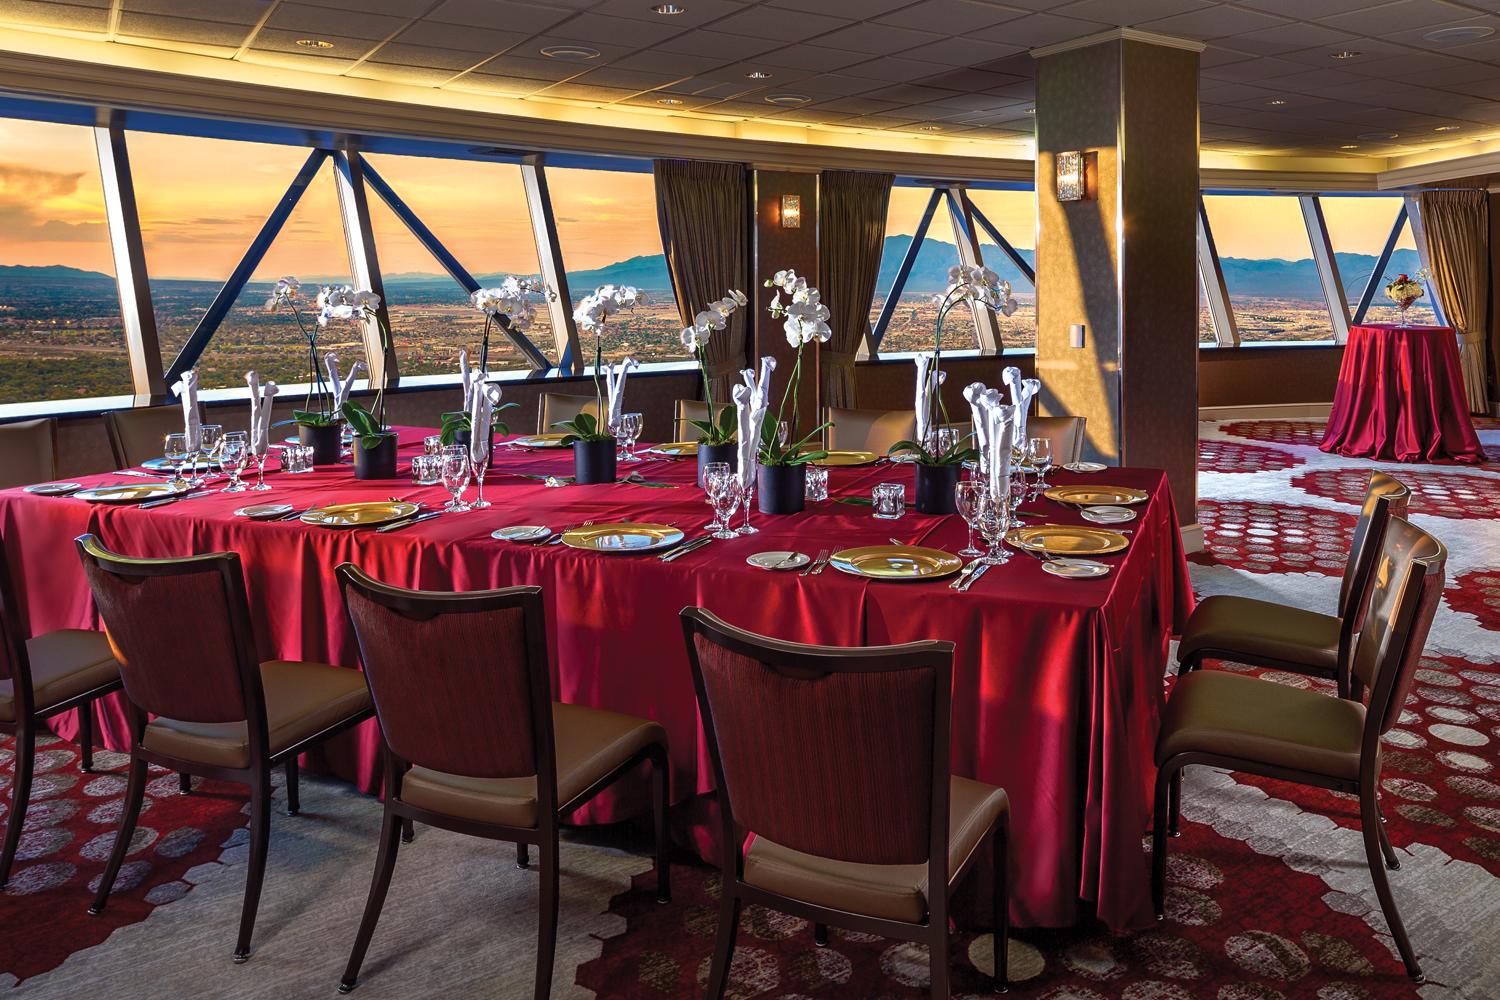 The STRAT Tower Horizon Room with a table with red tablecloth and full table set up for dinner and a view of the Las Vegas valley at sunset out the windows